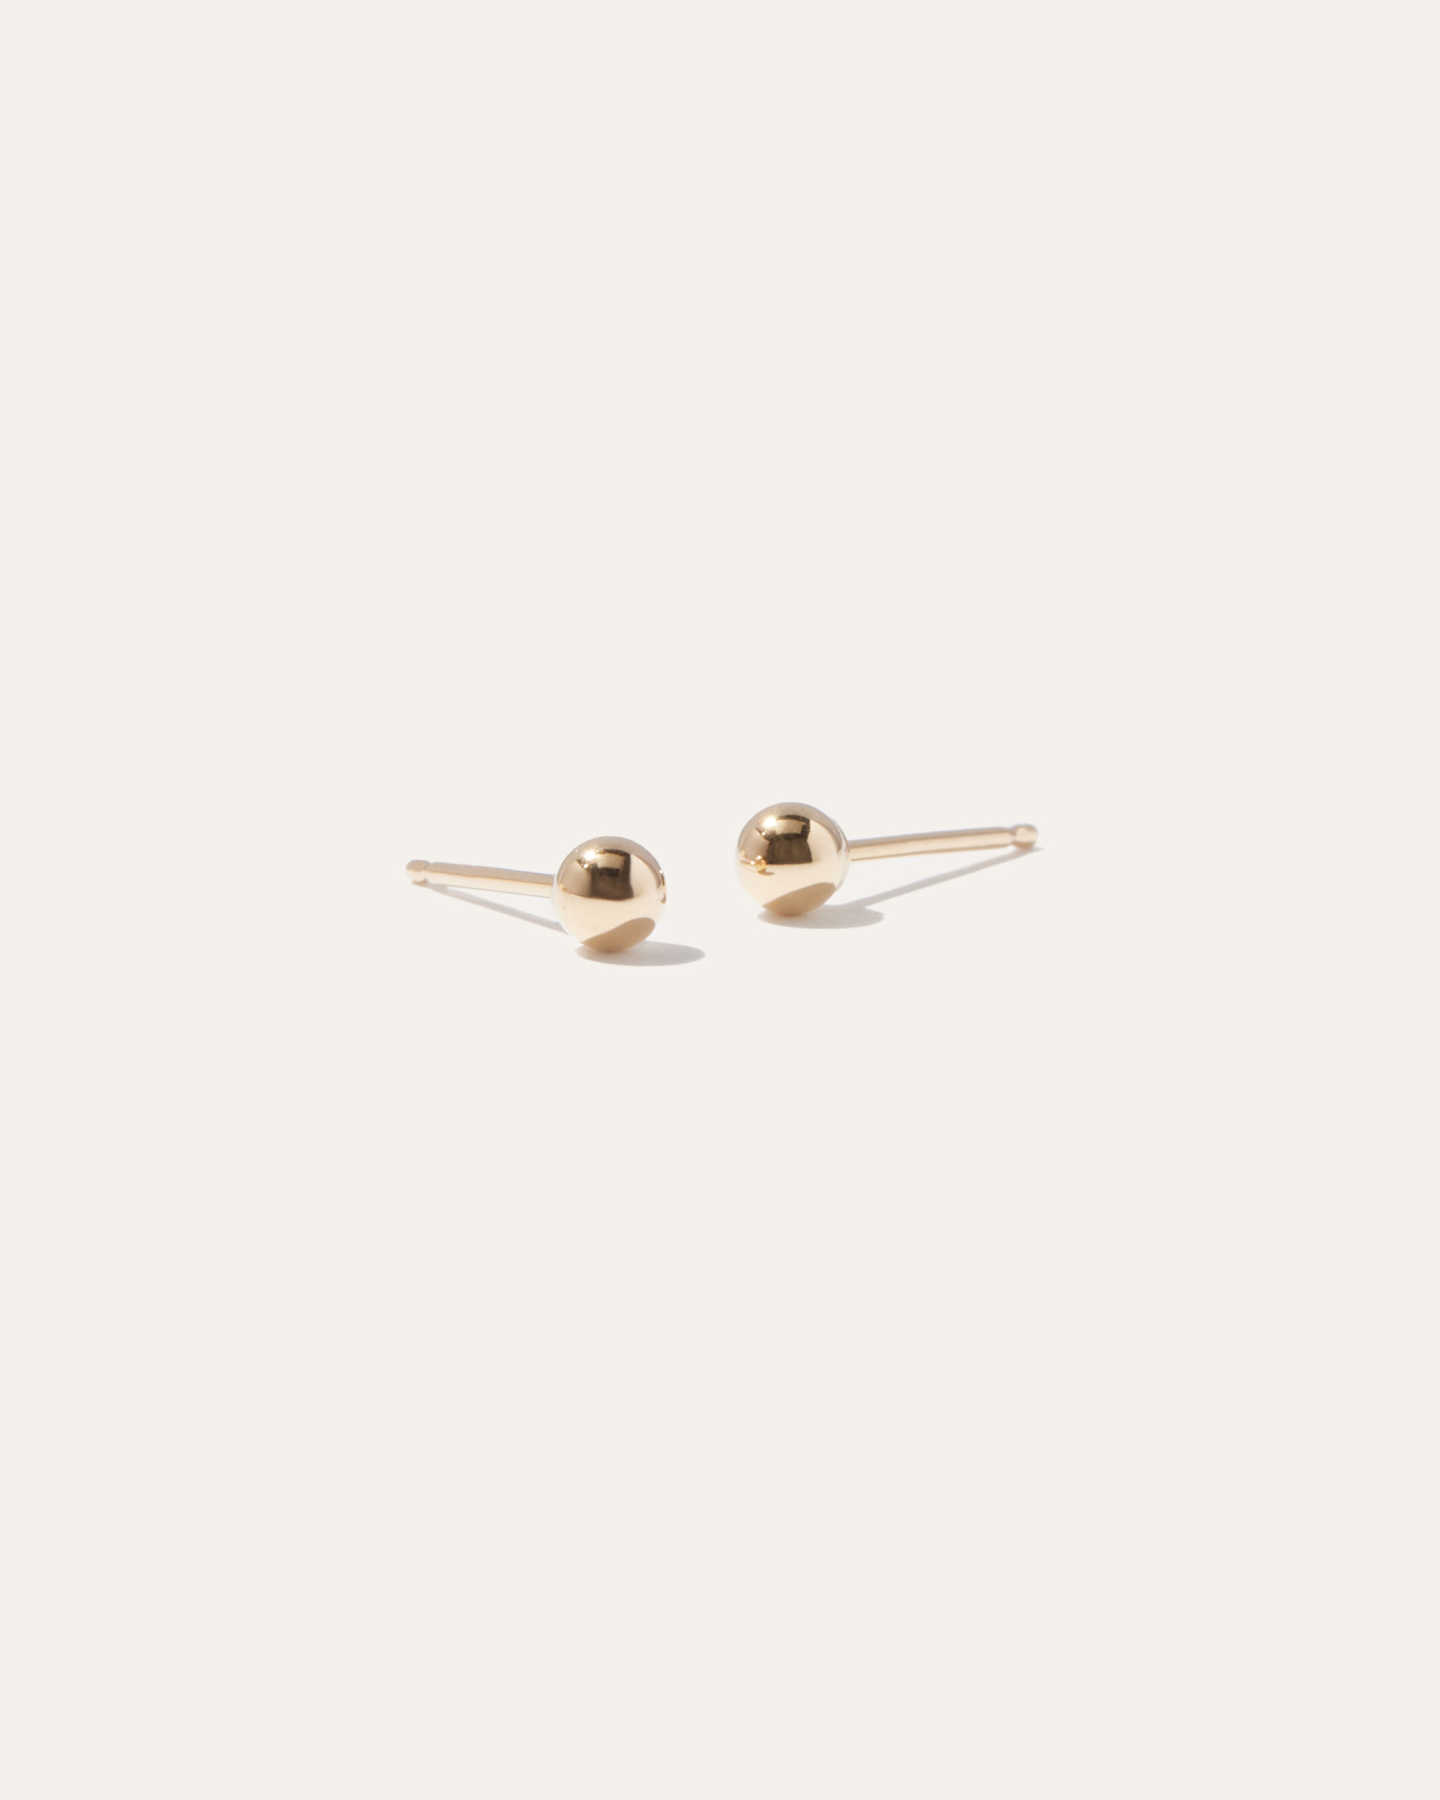 You May Also Like - Bold Gold Stud Earrings - Yellow Gold